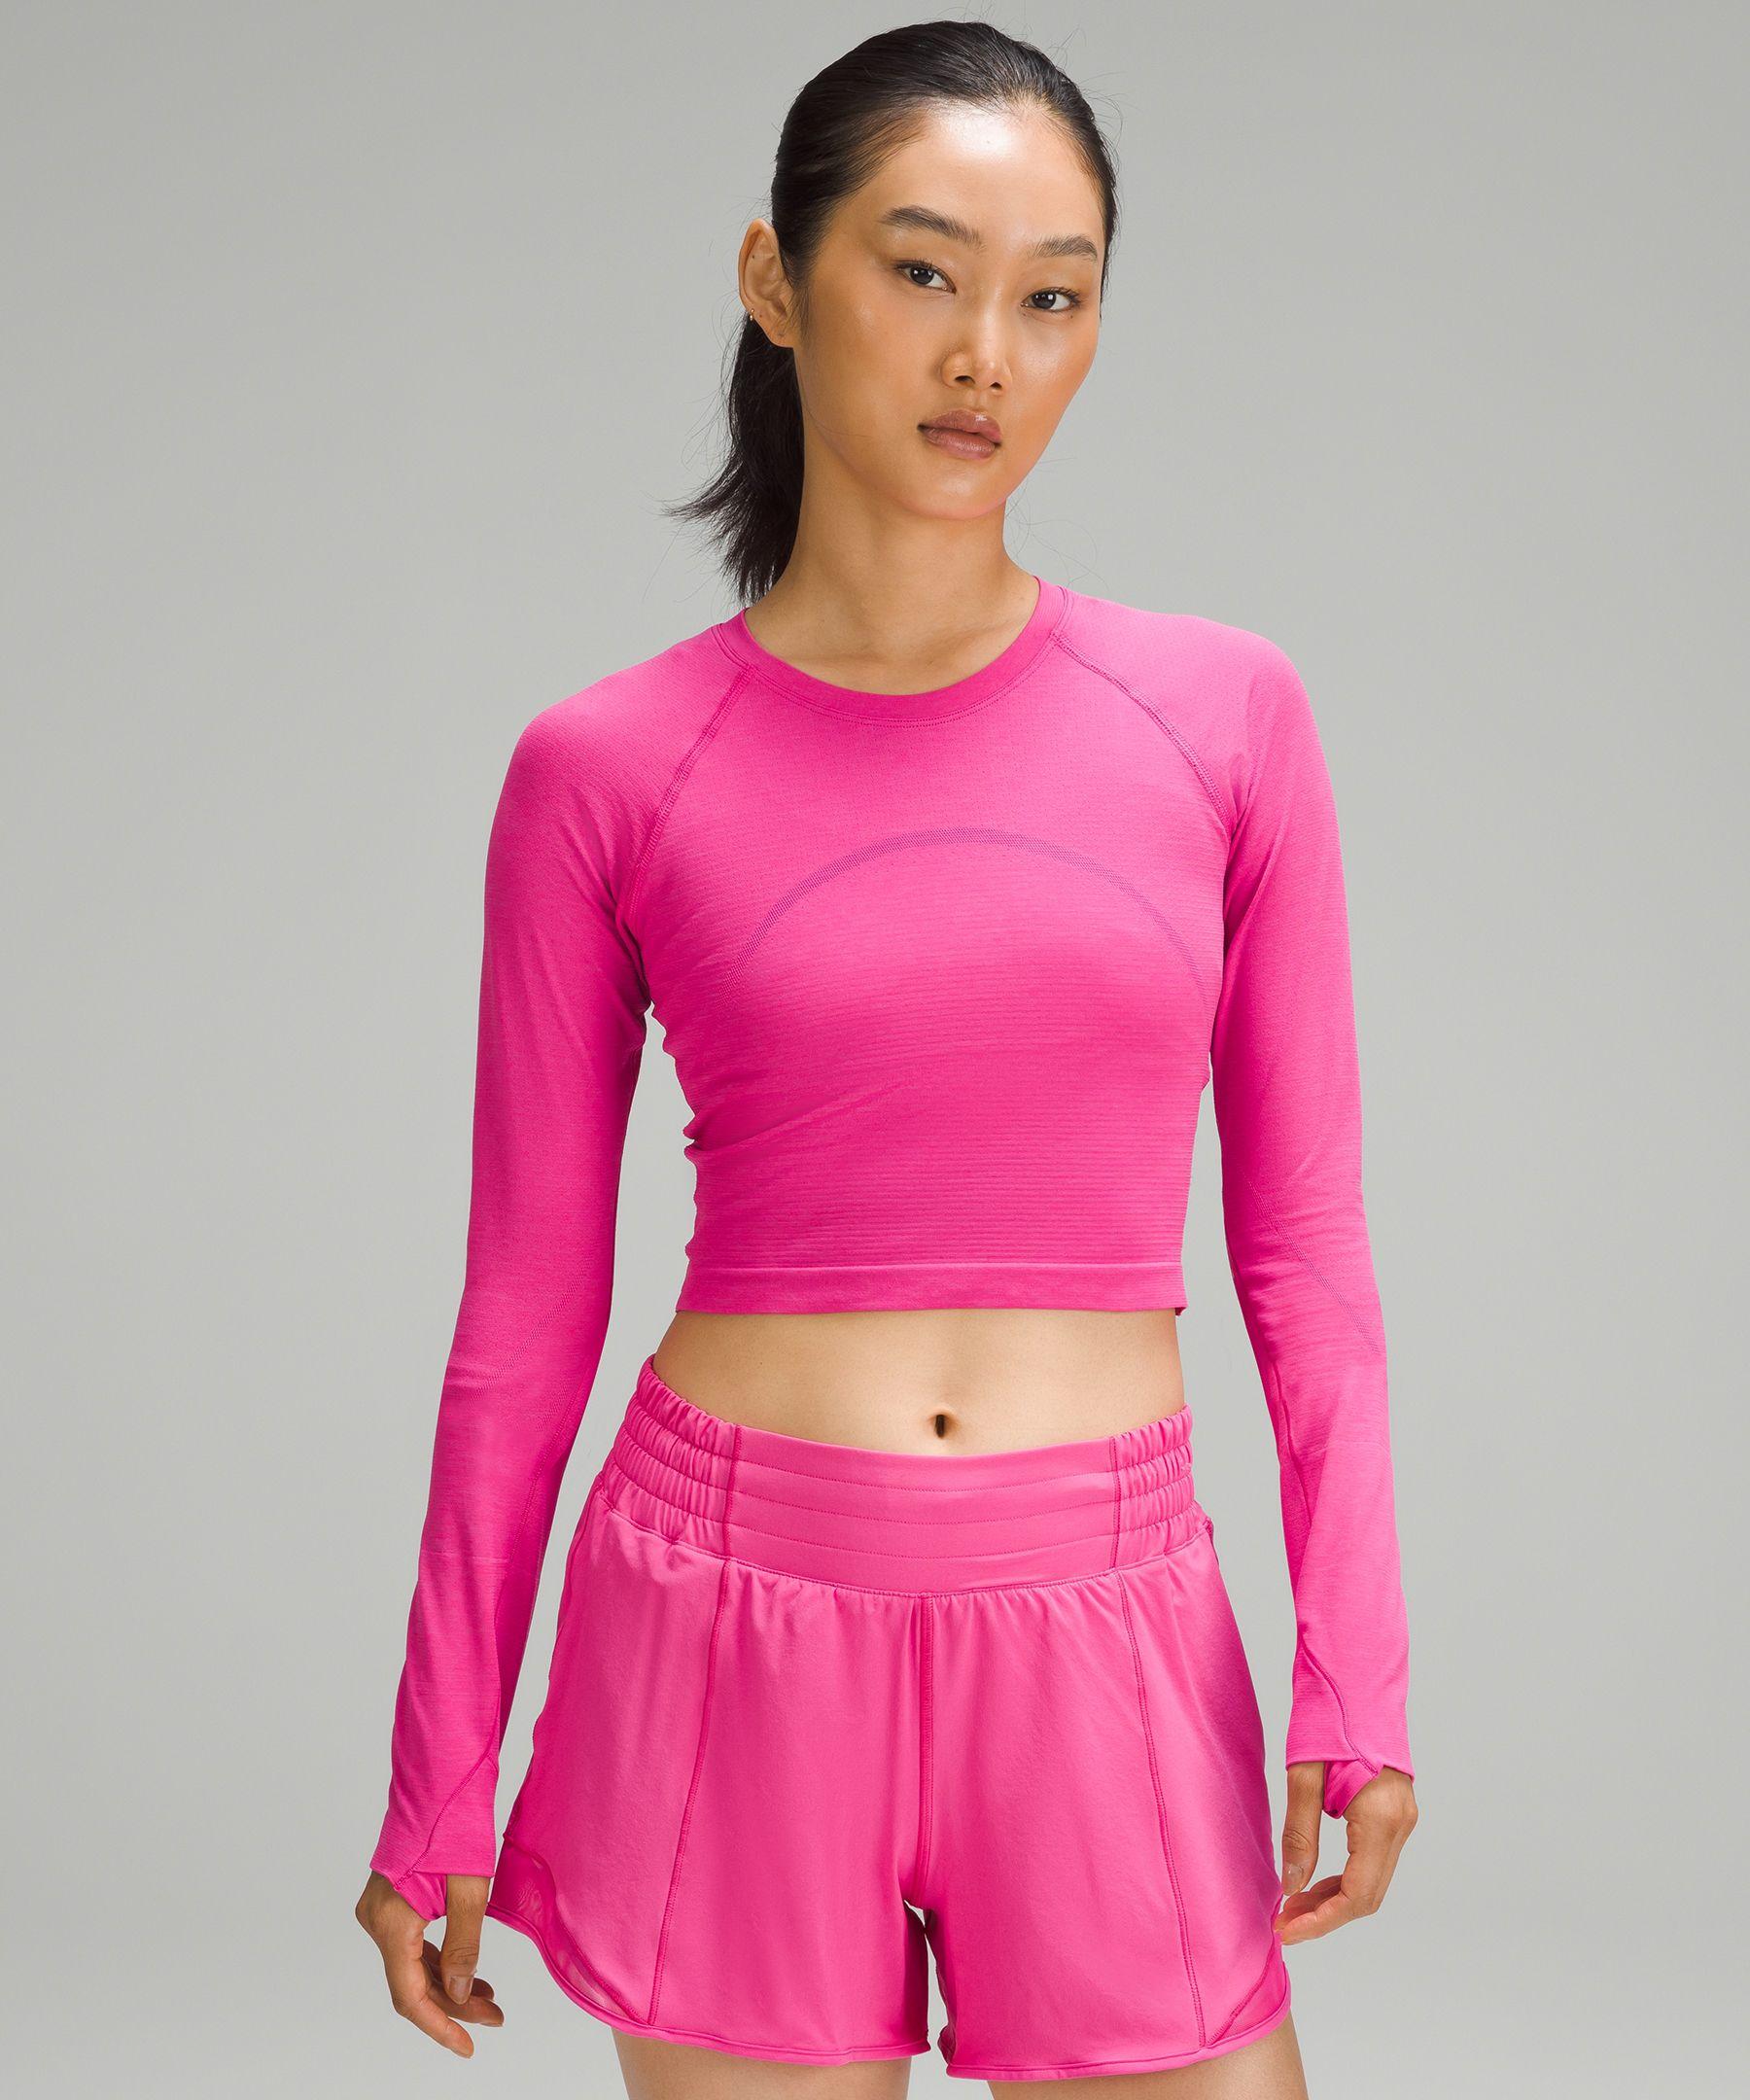 lululemon athletica Swiftly Tech Cropped Long-sleeve Shirt 2.0 in